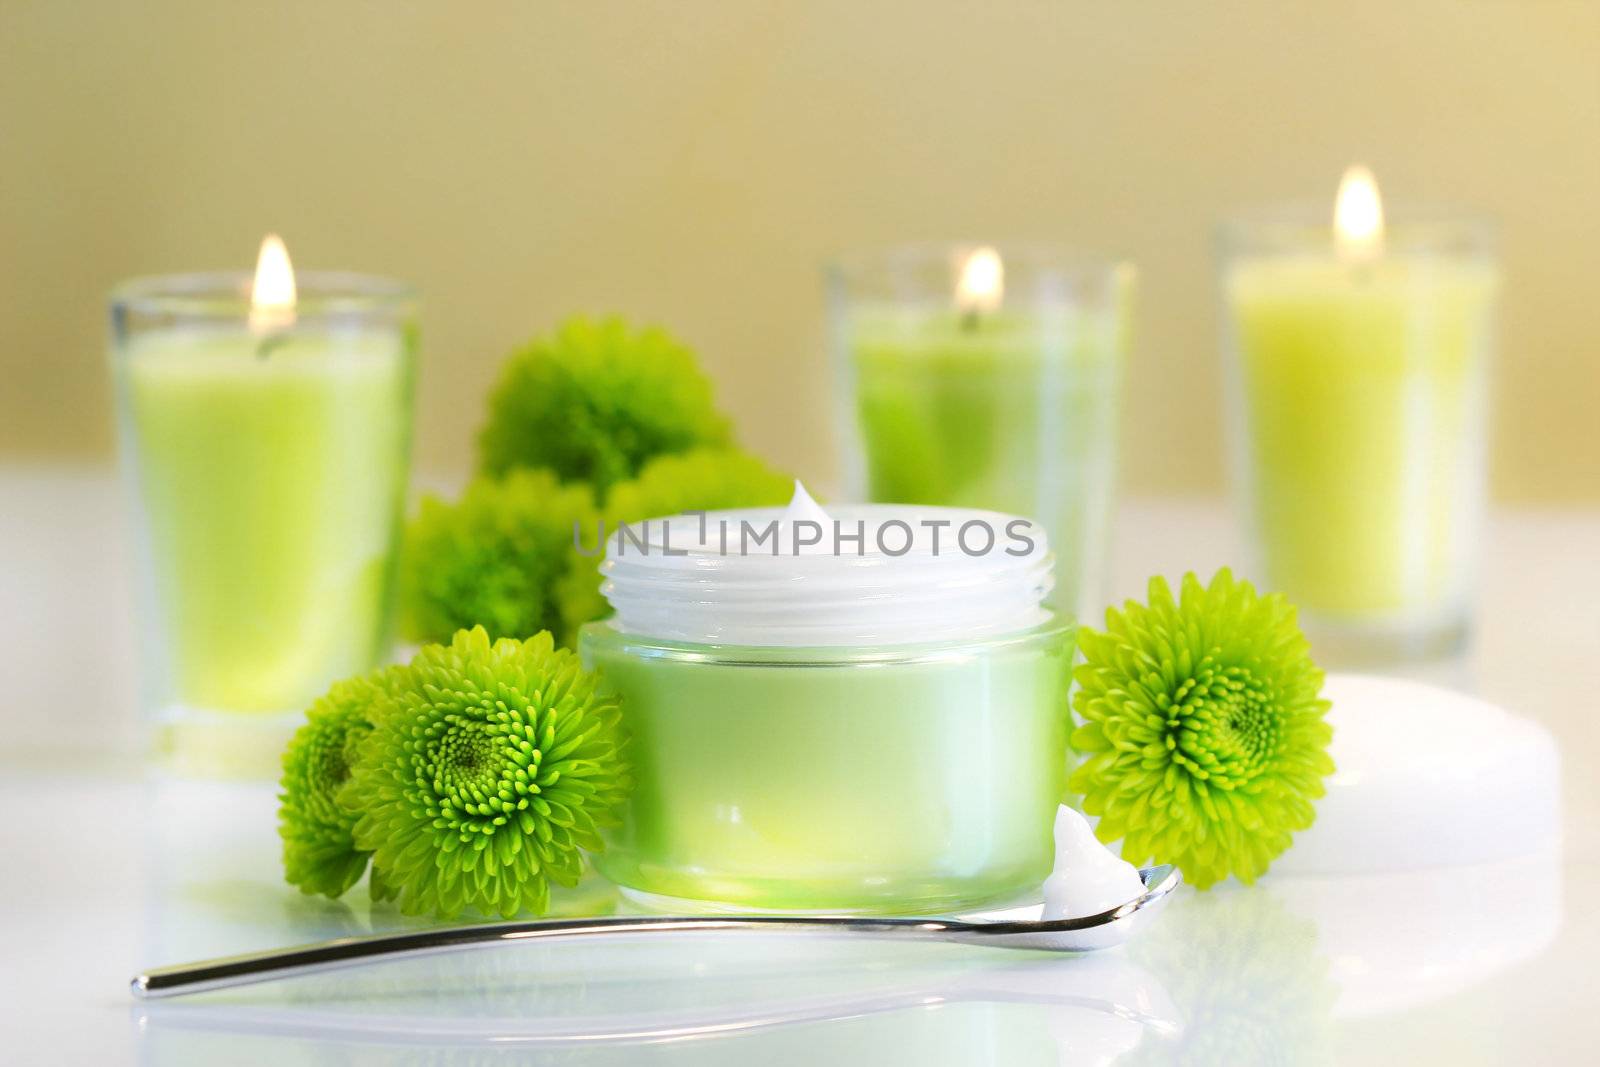 Moisturizing face cream with candles